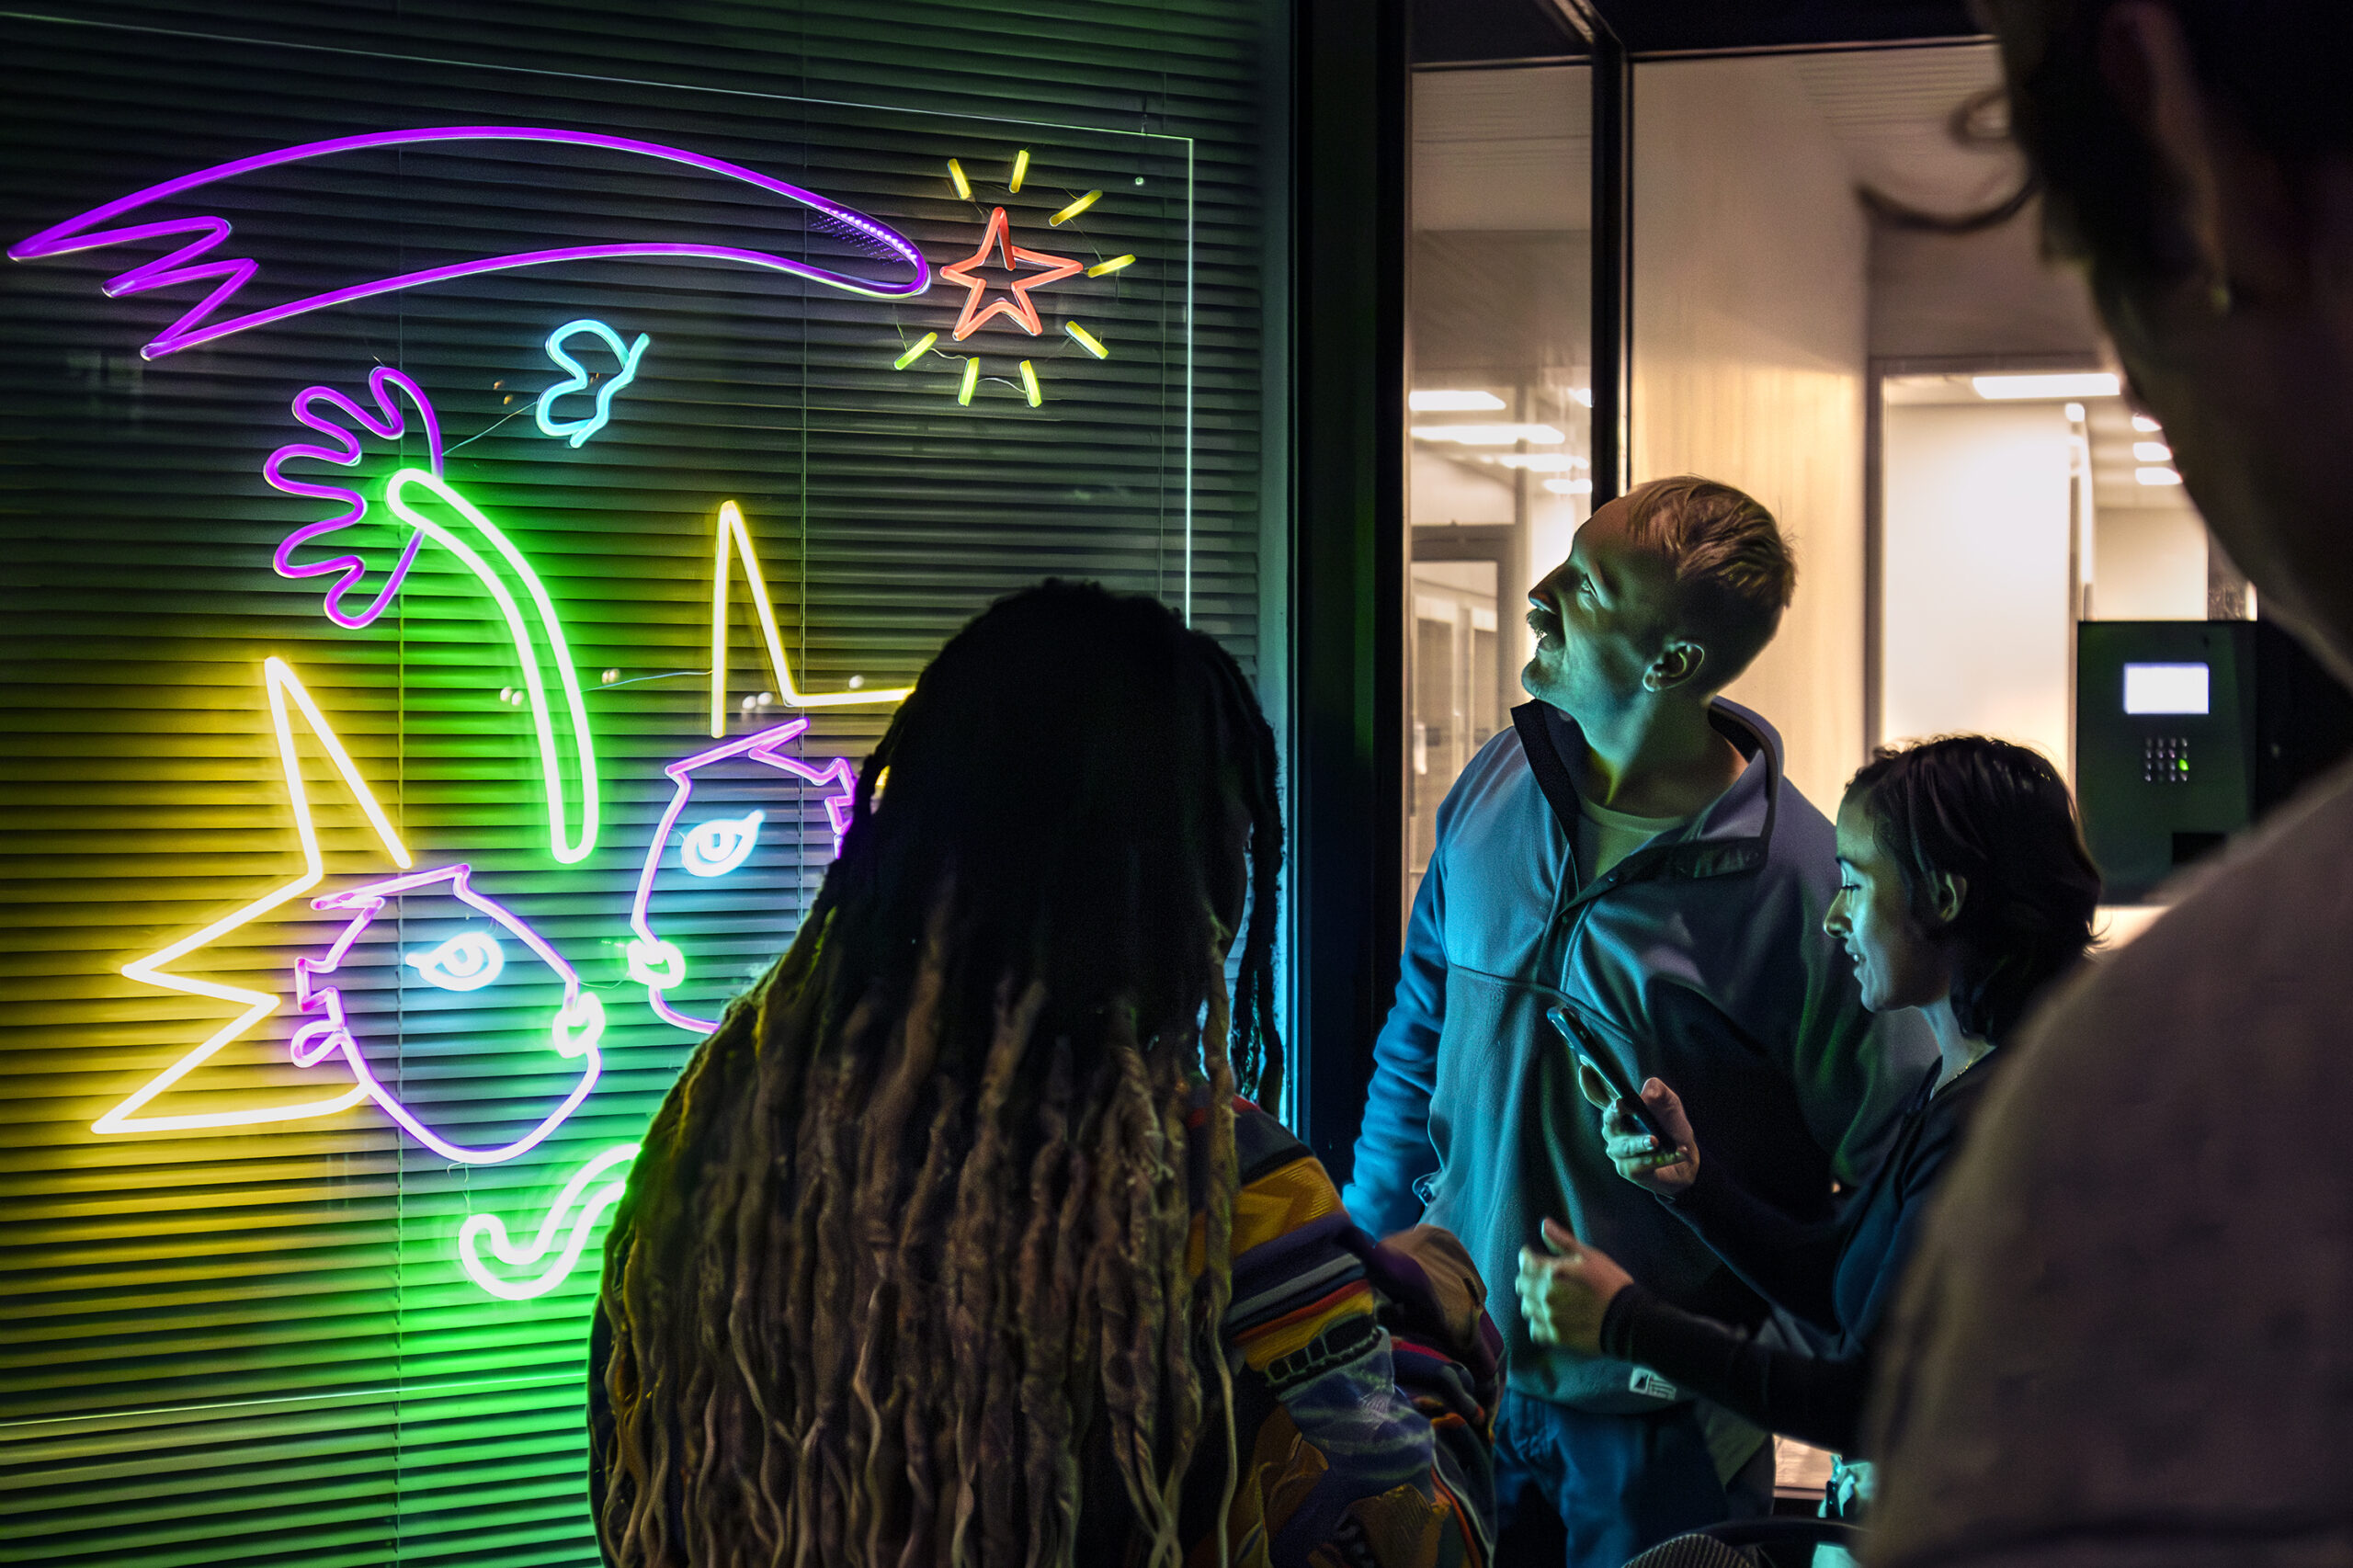 An audience gazing at a public art piece with glowing neon lights in the outline of fun shapes and figures on a window